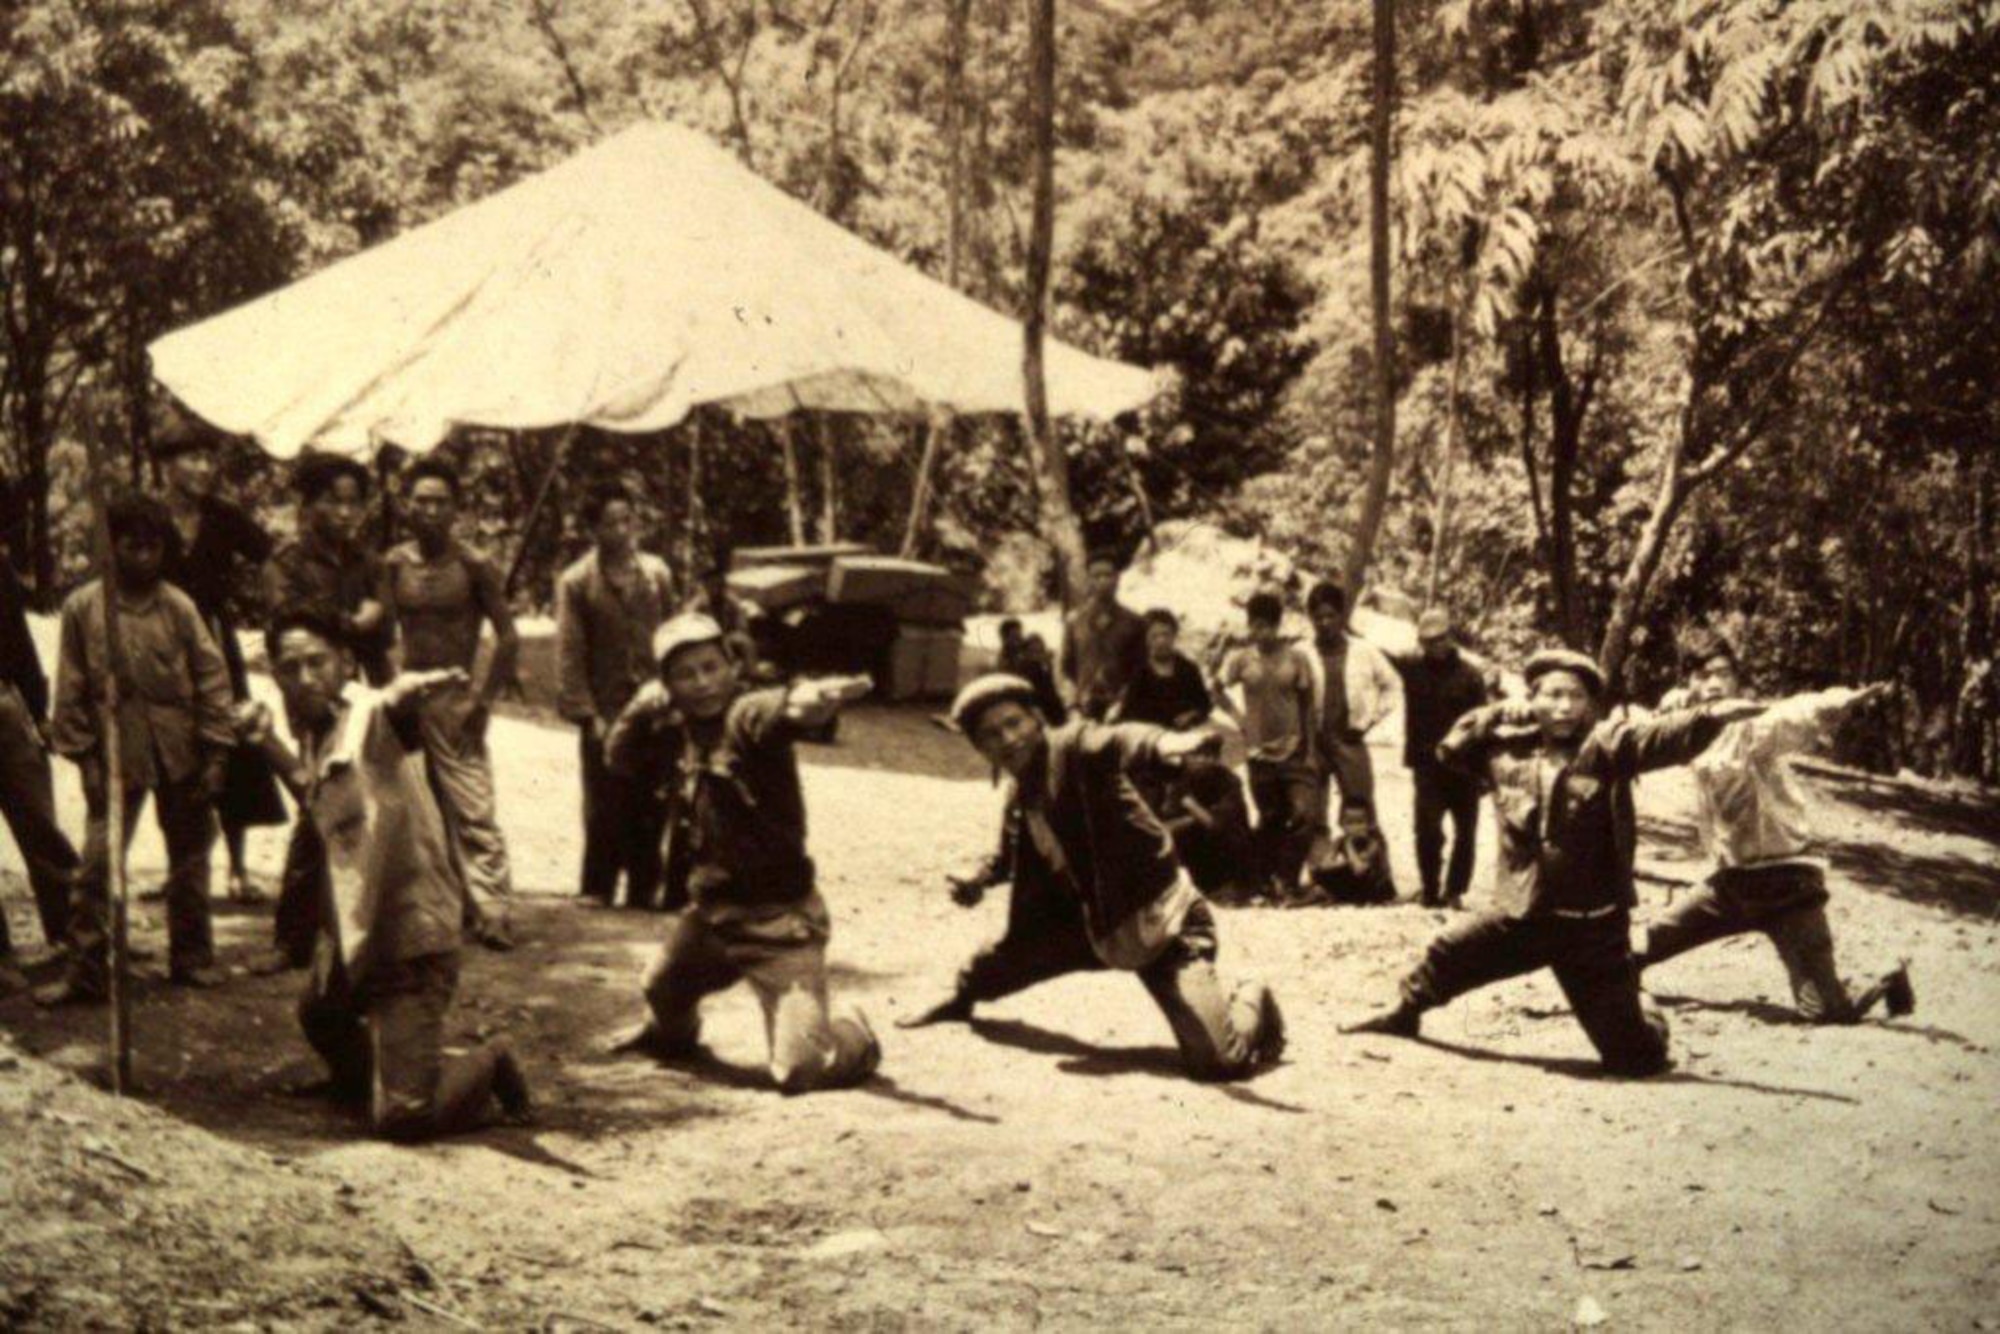 Grenade training, 1960s, northern Laos, (Courtesy of Hmong Archives)